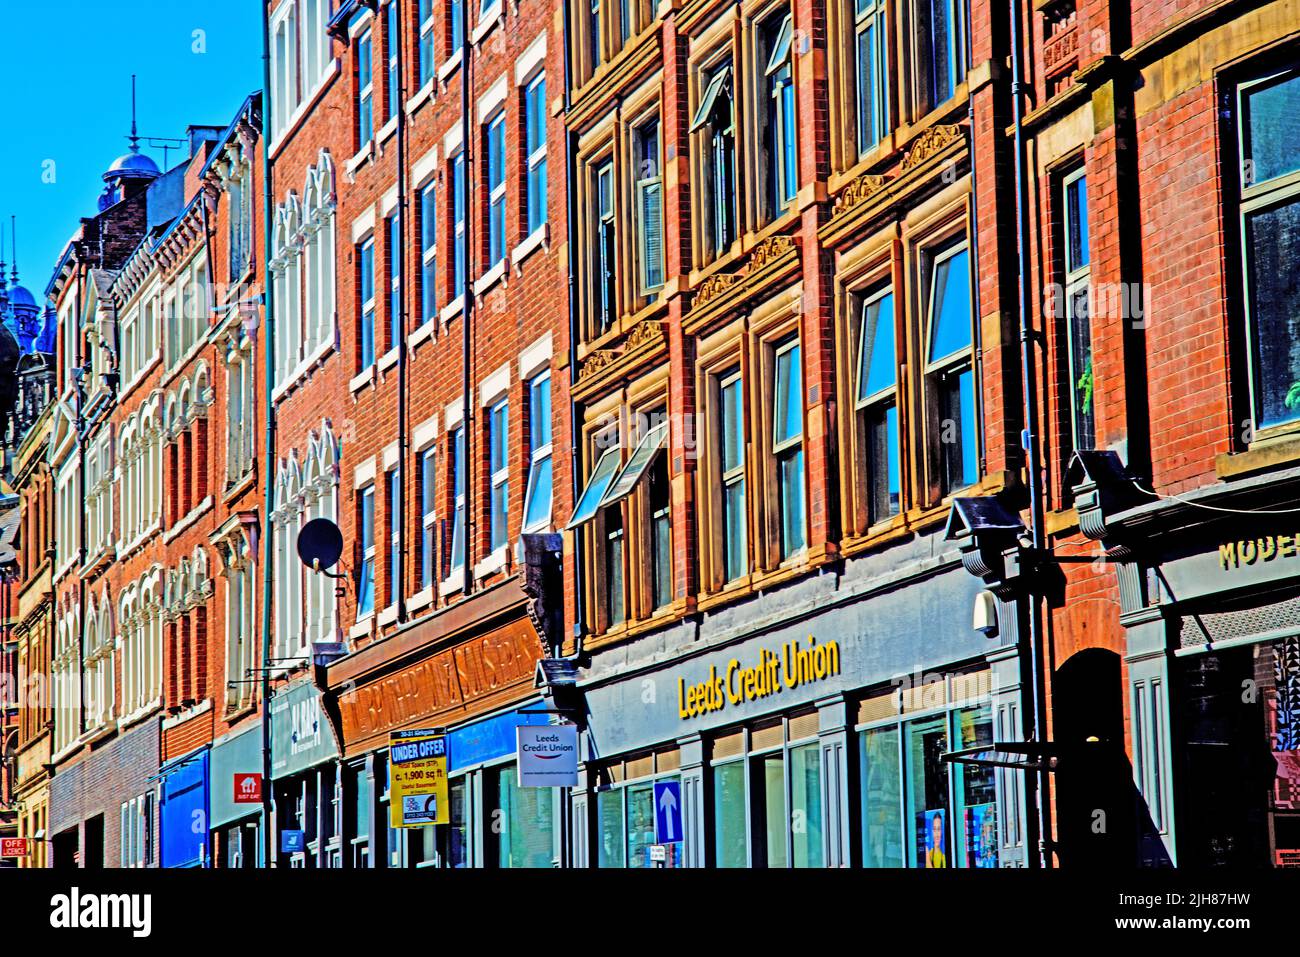 Buildings and Archtecture, Kirkgate, Leeds, England Stock Photo